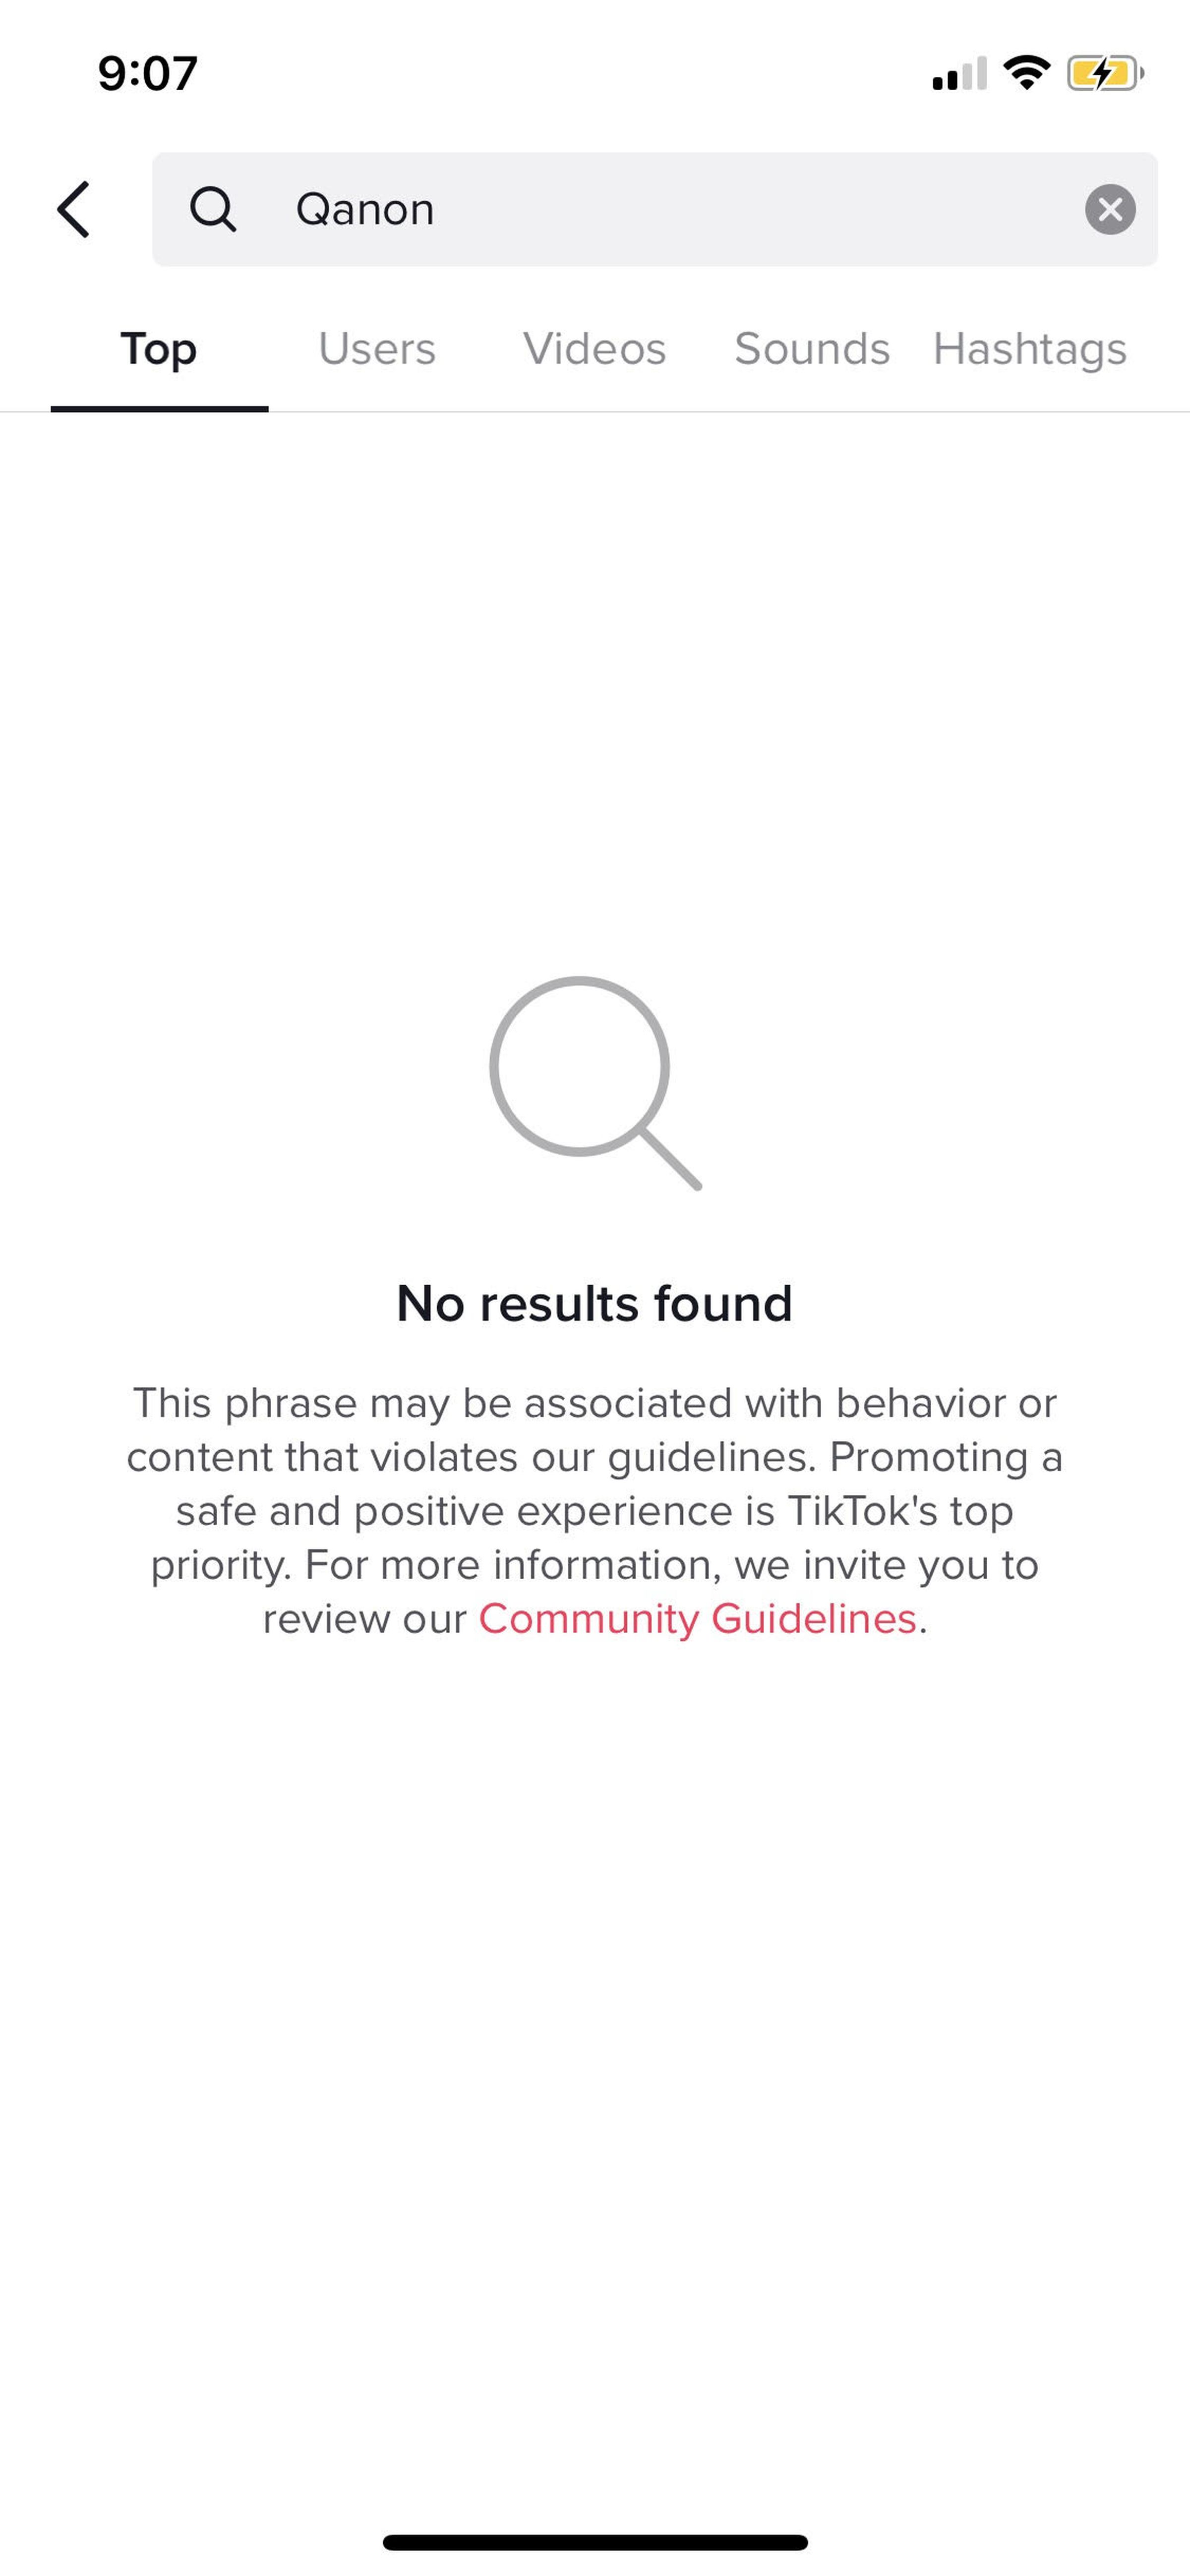 A search for QAnon on TikTok brings up its community guidelines